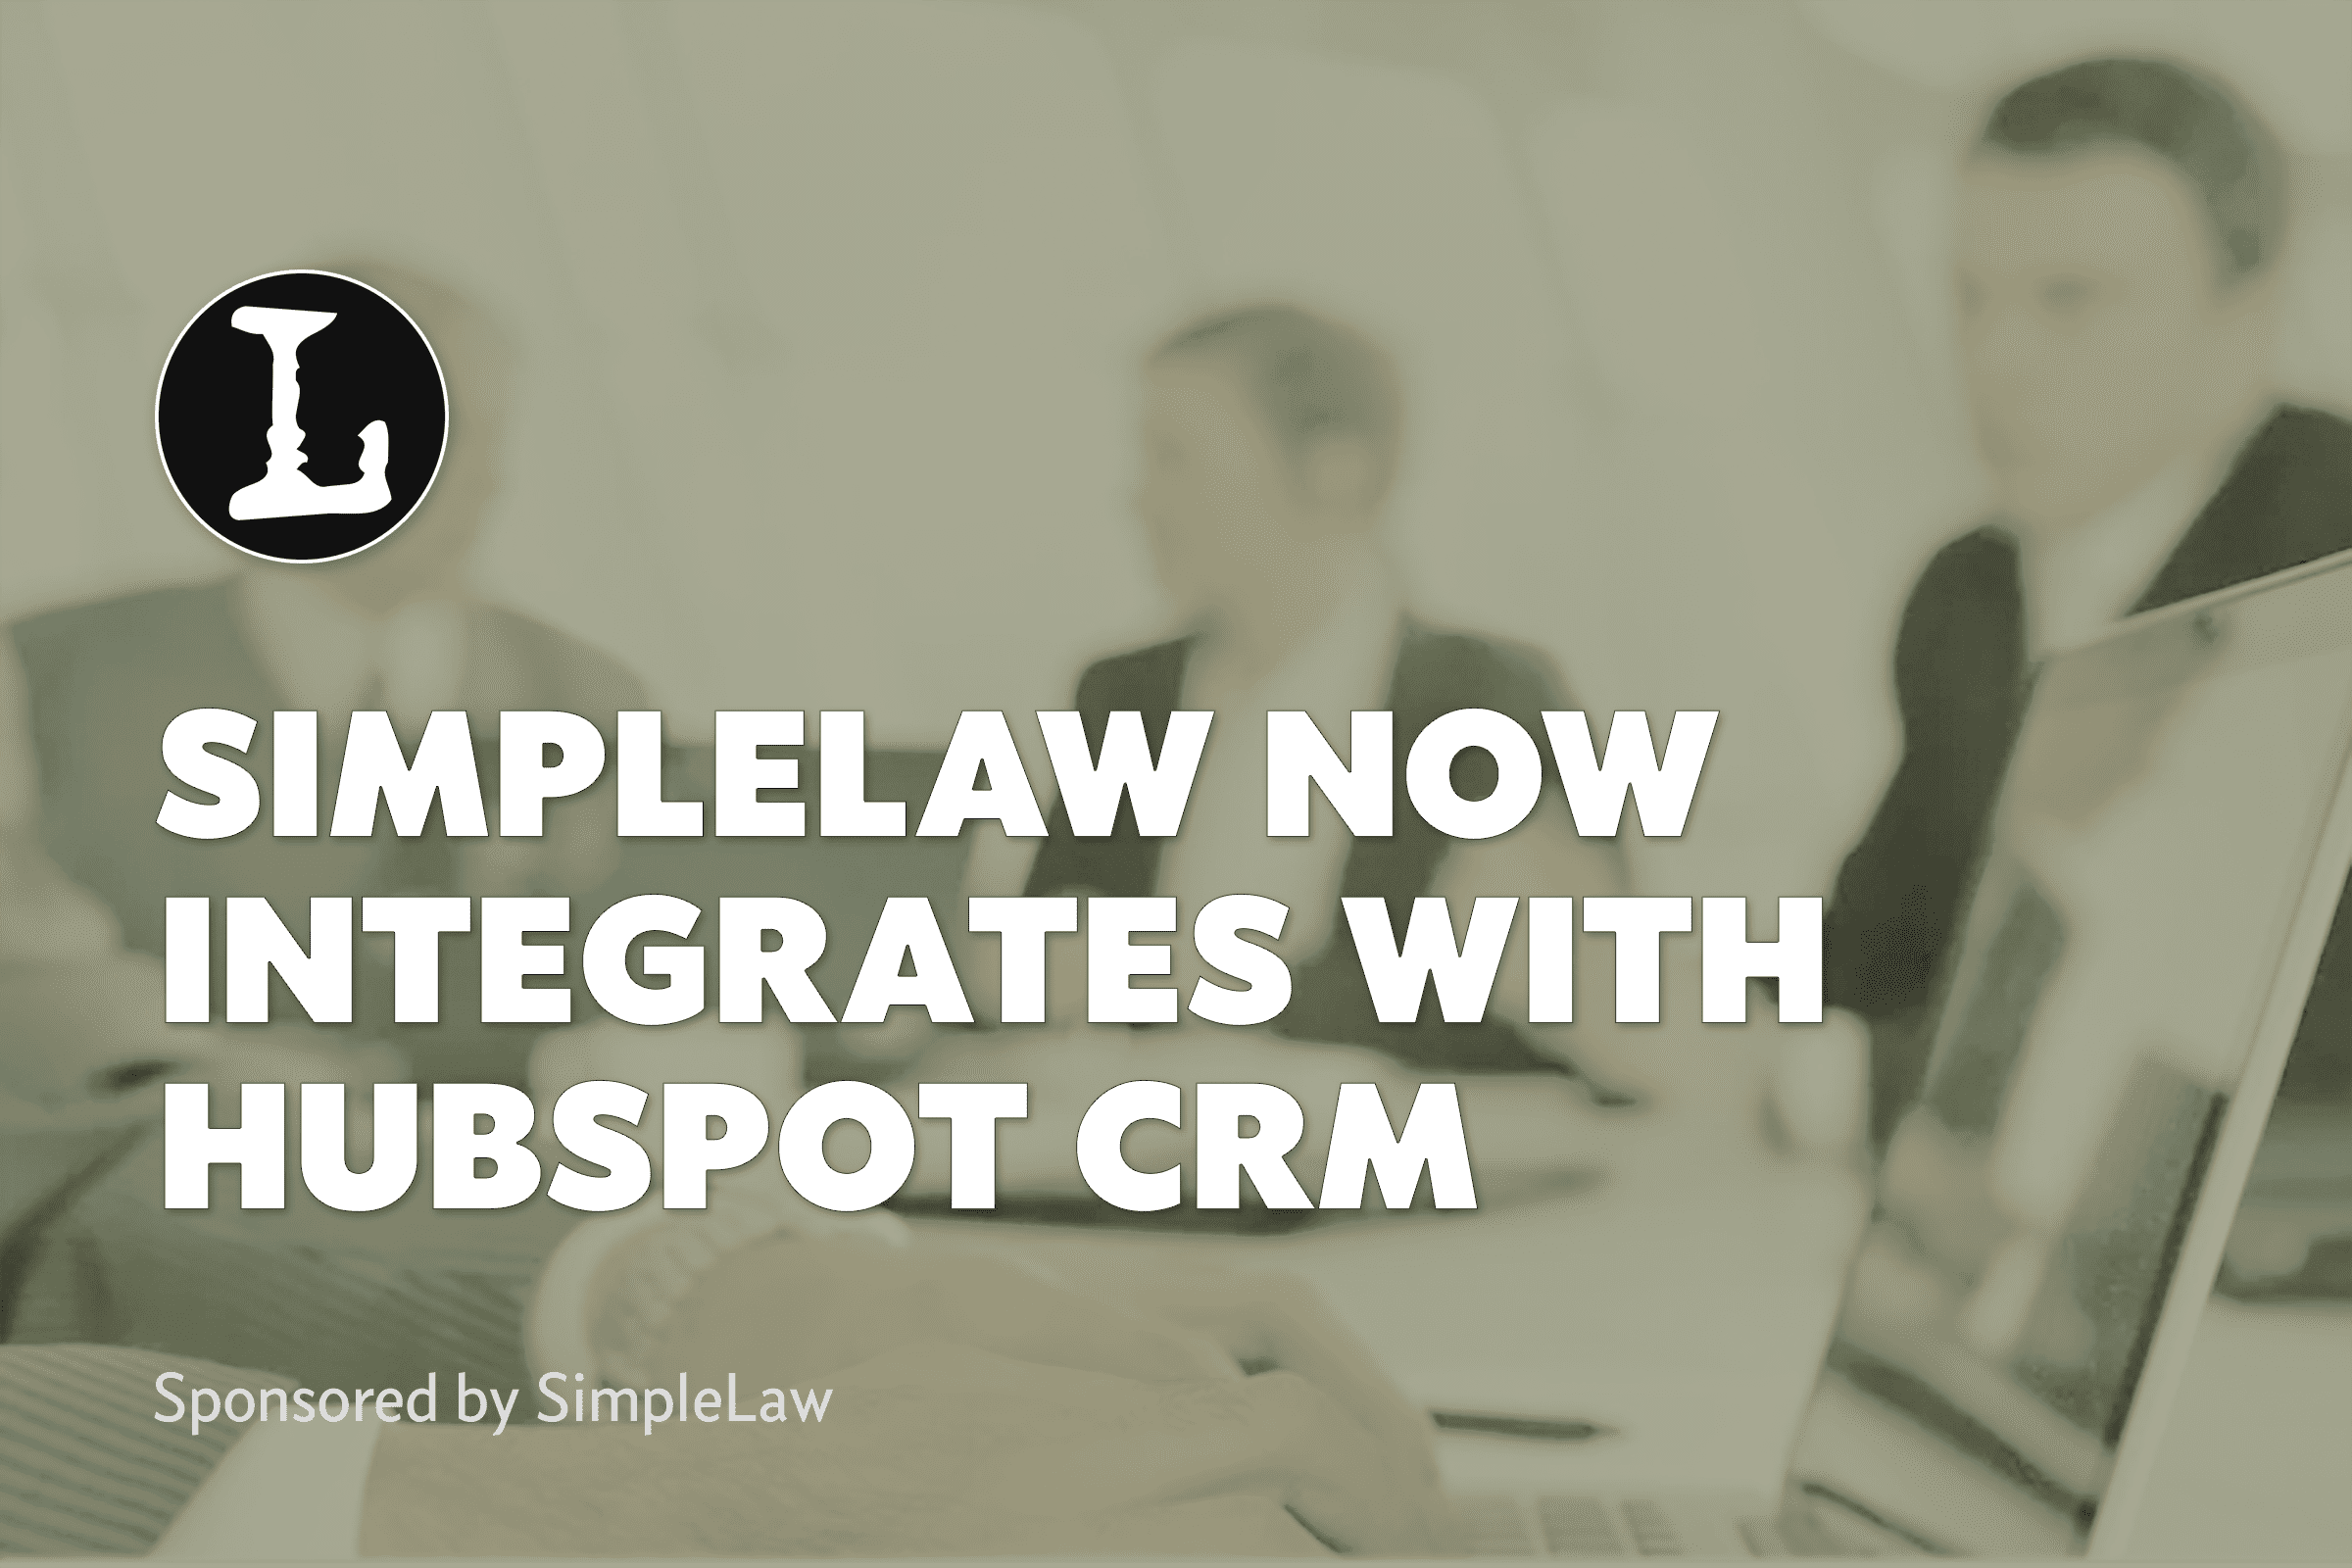 SimpleLaw Product Spotlight featured image